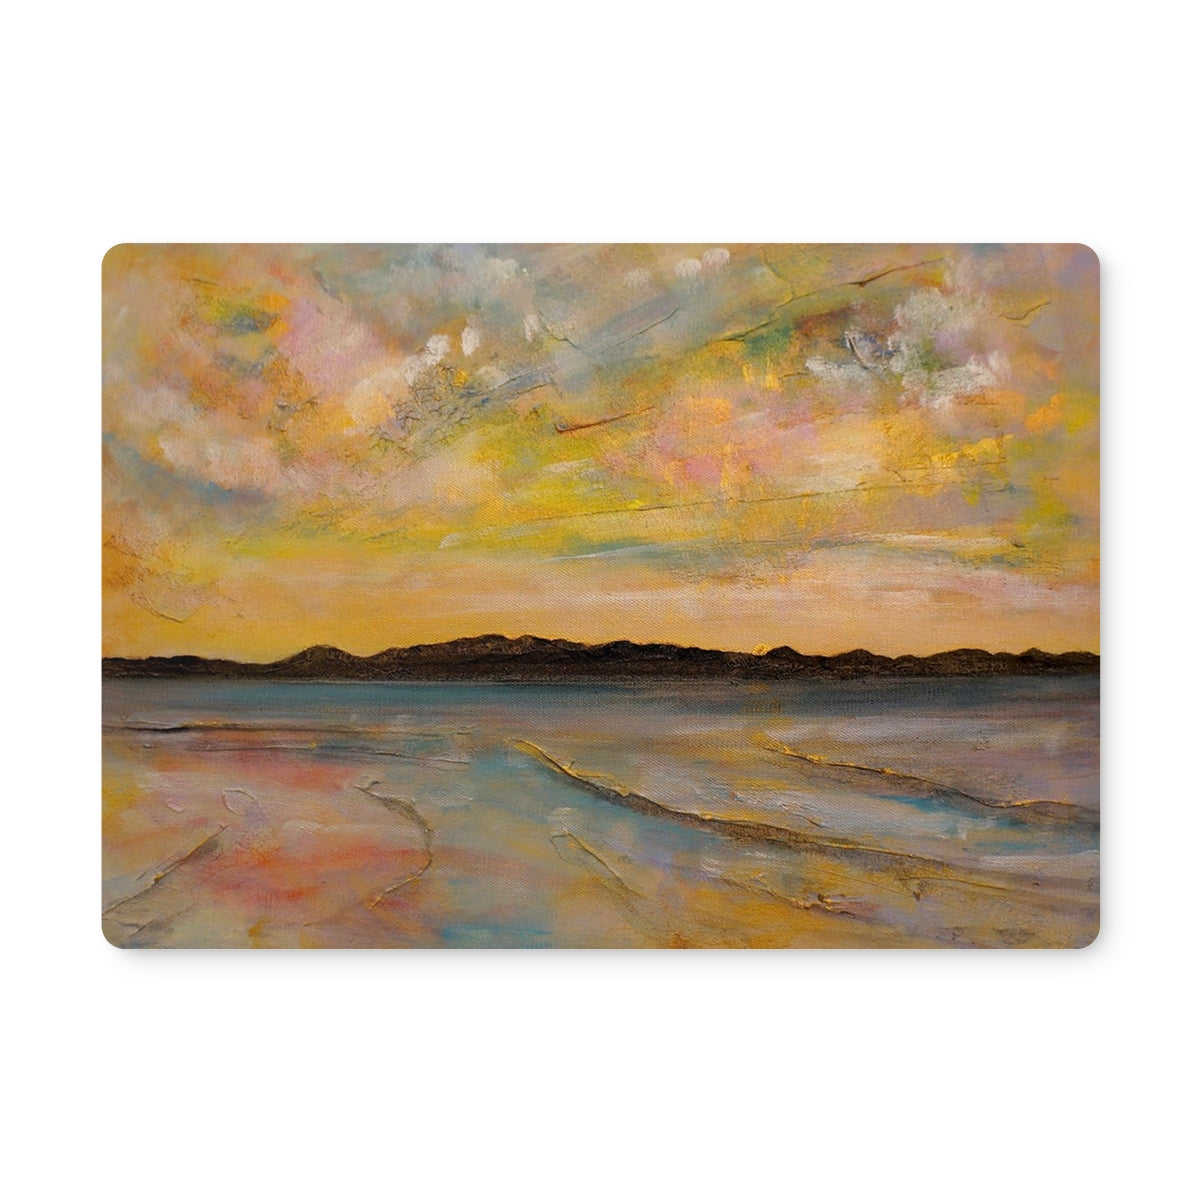 Vallay Island North Uist Art Gifts Placemat-Placemats-Hebridean Islands Art Gallery-Single Placemat-Paintings, Prints, Homeware, Art Gifts From Scotland By Scottish Artist Kevin Hunter